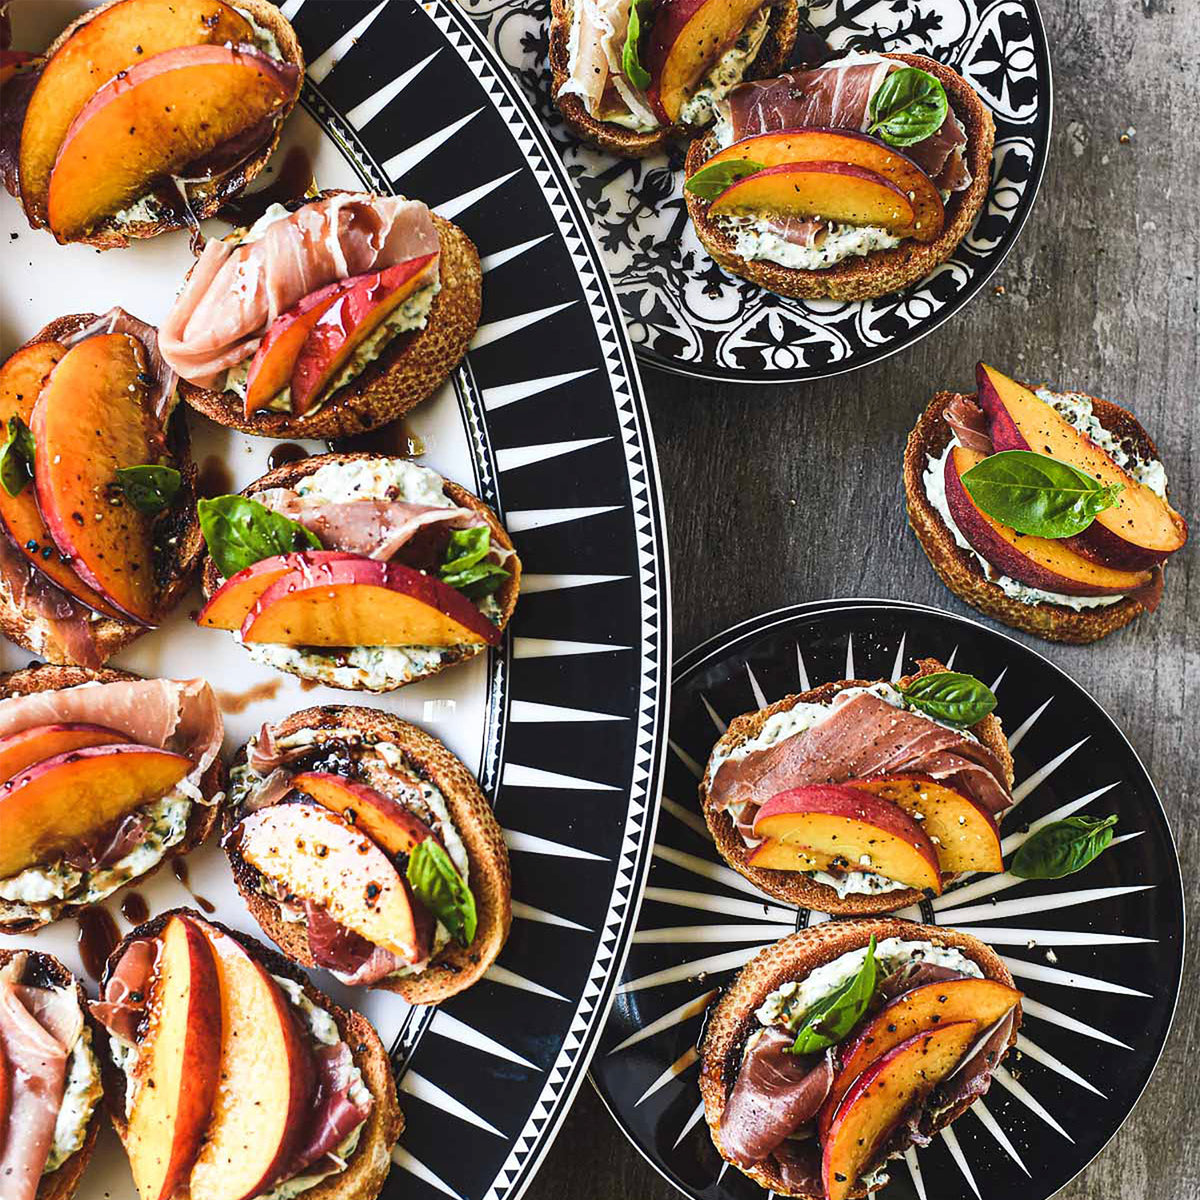 Elegant Peach Bruschetta with Prosciutto served on the Marrakech Large Oval Rimmed Platter by Caskata Artisanal Home.